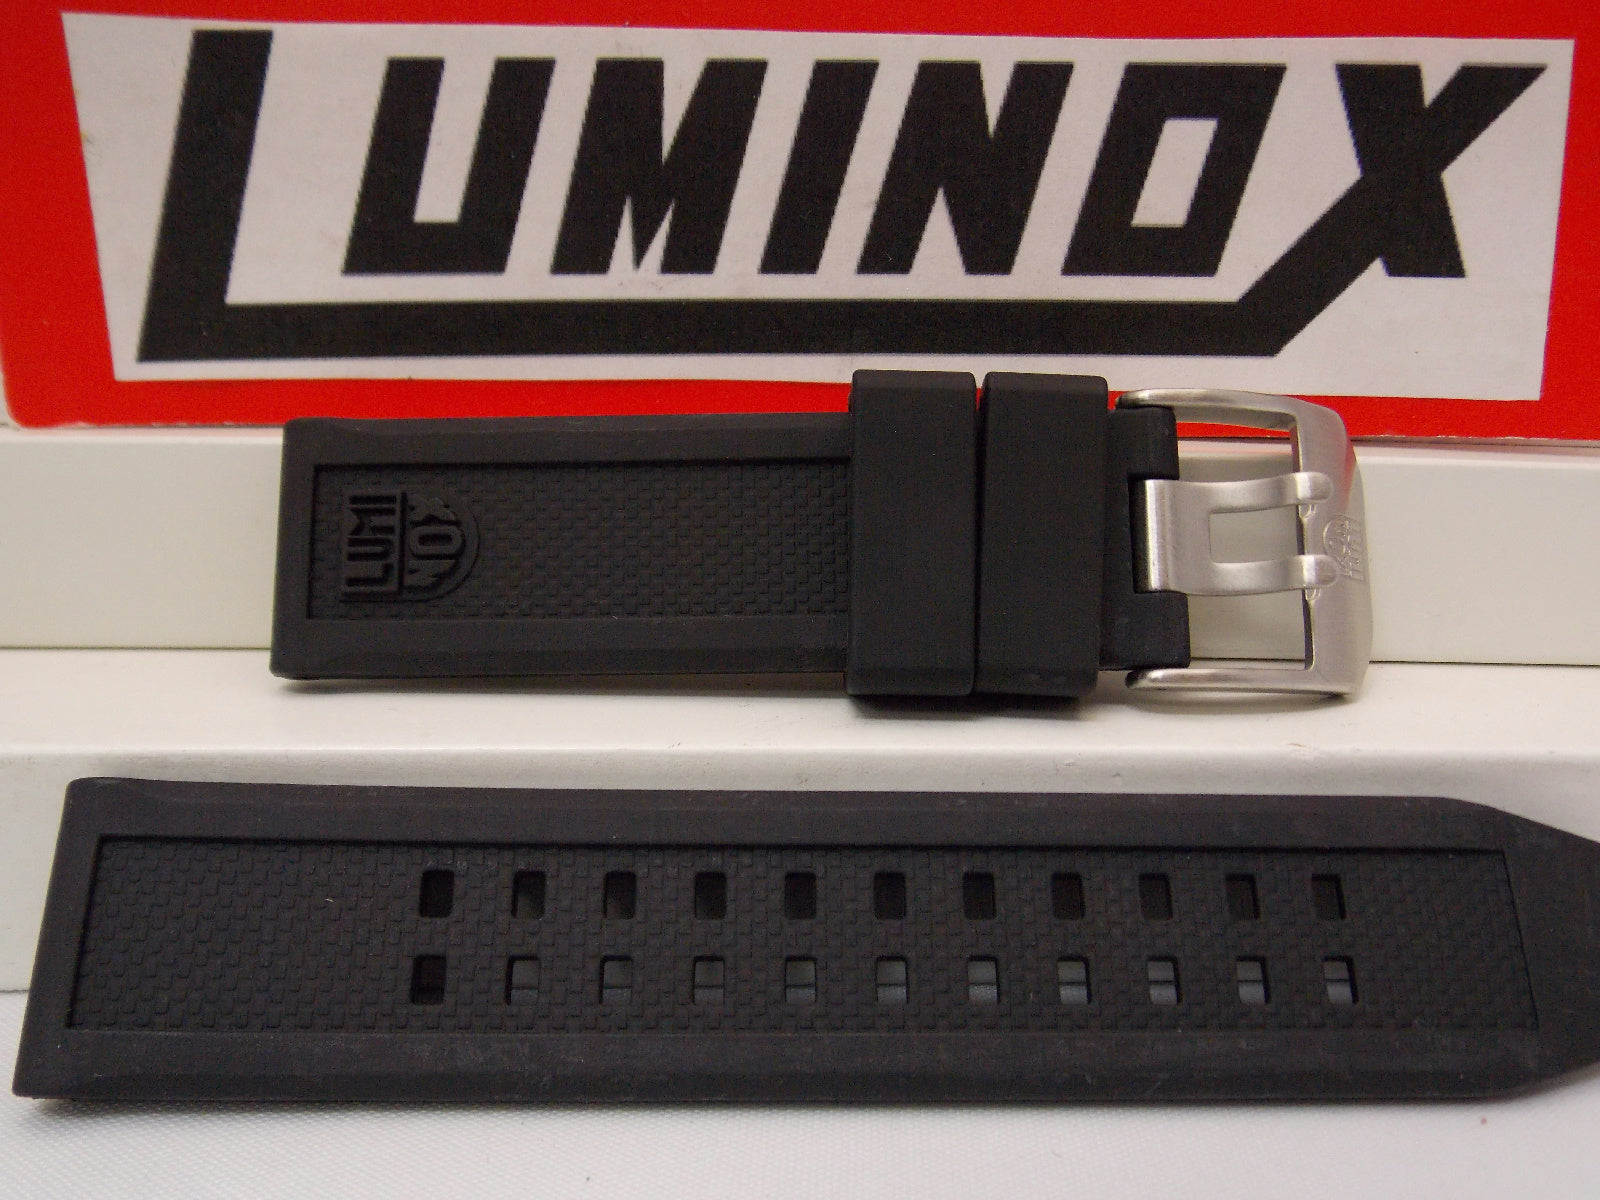 Luminox Watchband 7050. 20mm Wide Black Rubber Strap. Thick, Durable and Soft